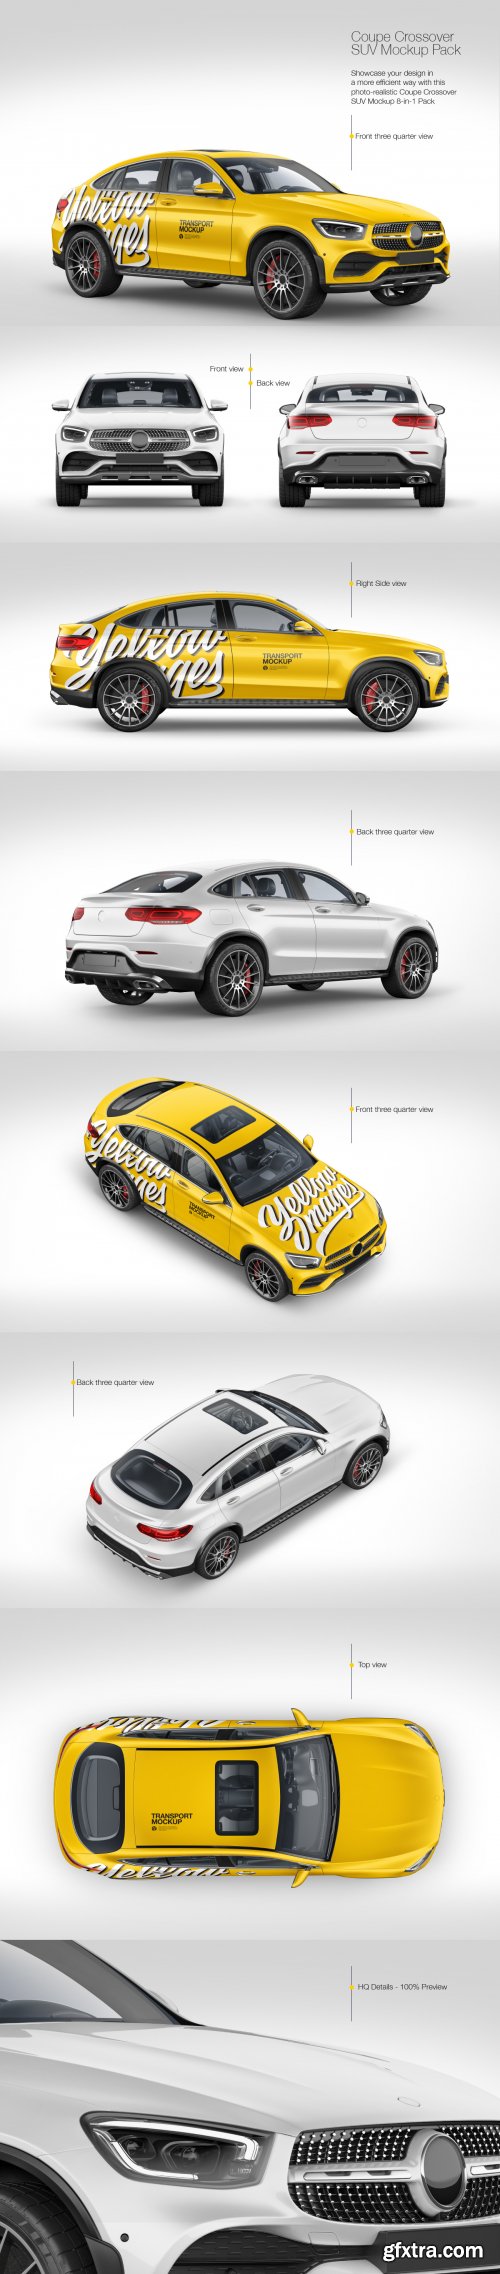 Coupe Crossover SUV Mockup Pack 48225